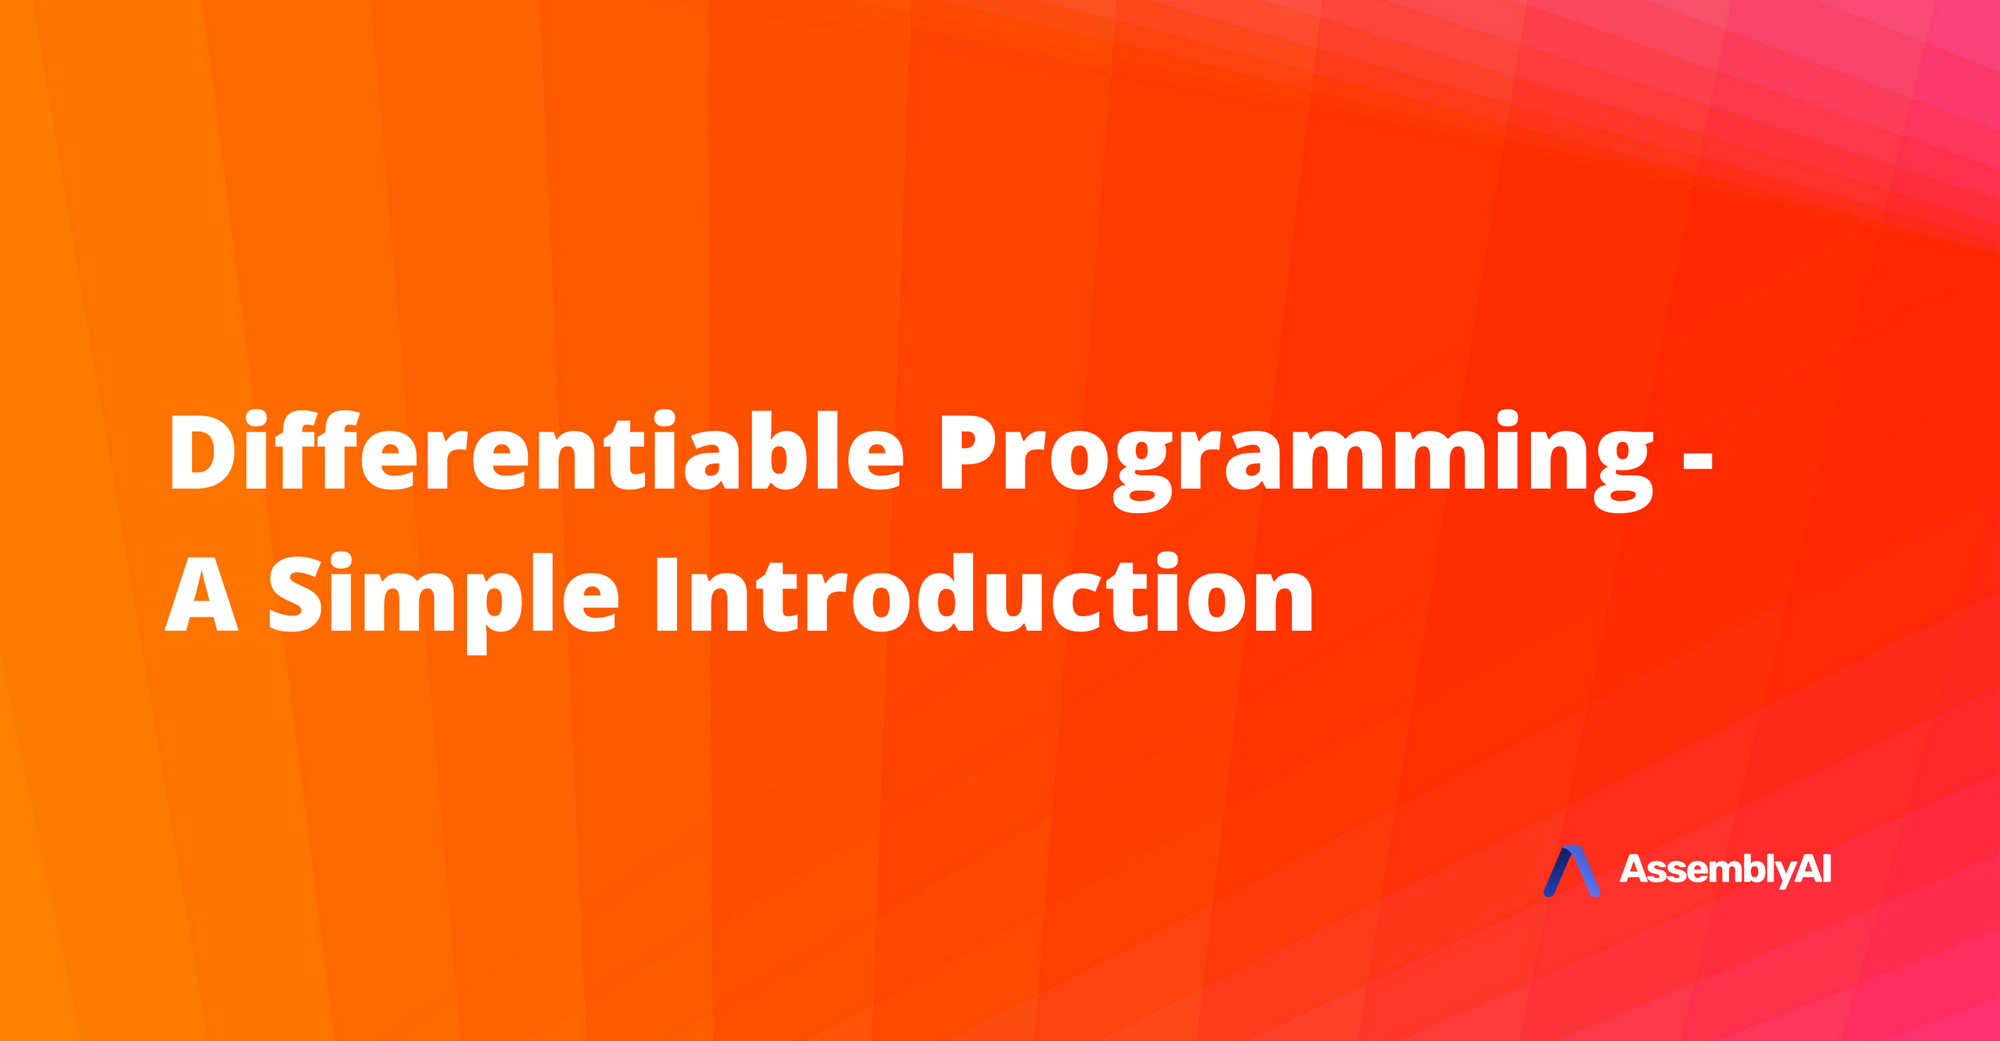 Differentiable Programming - A Simple Introduction